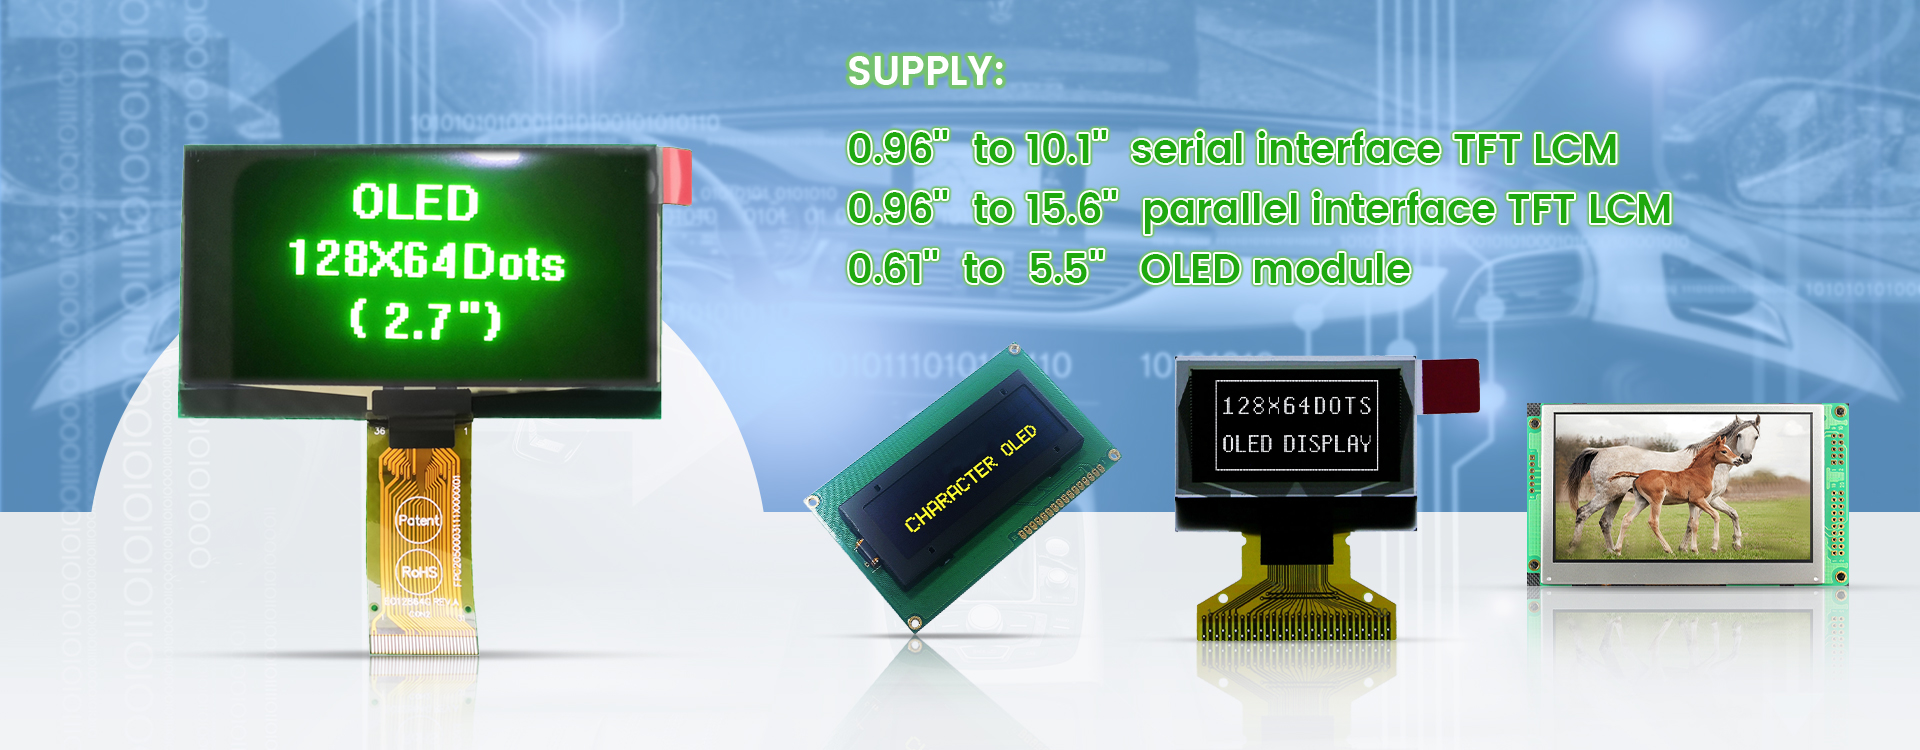 OLED Display for Medical Equipment